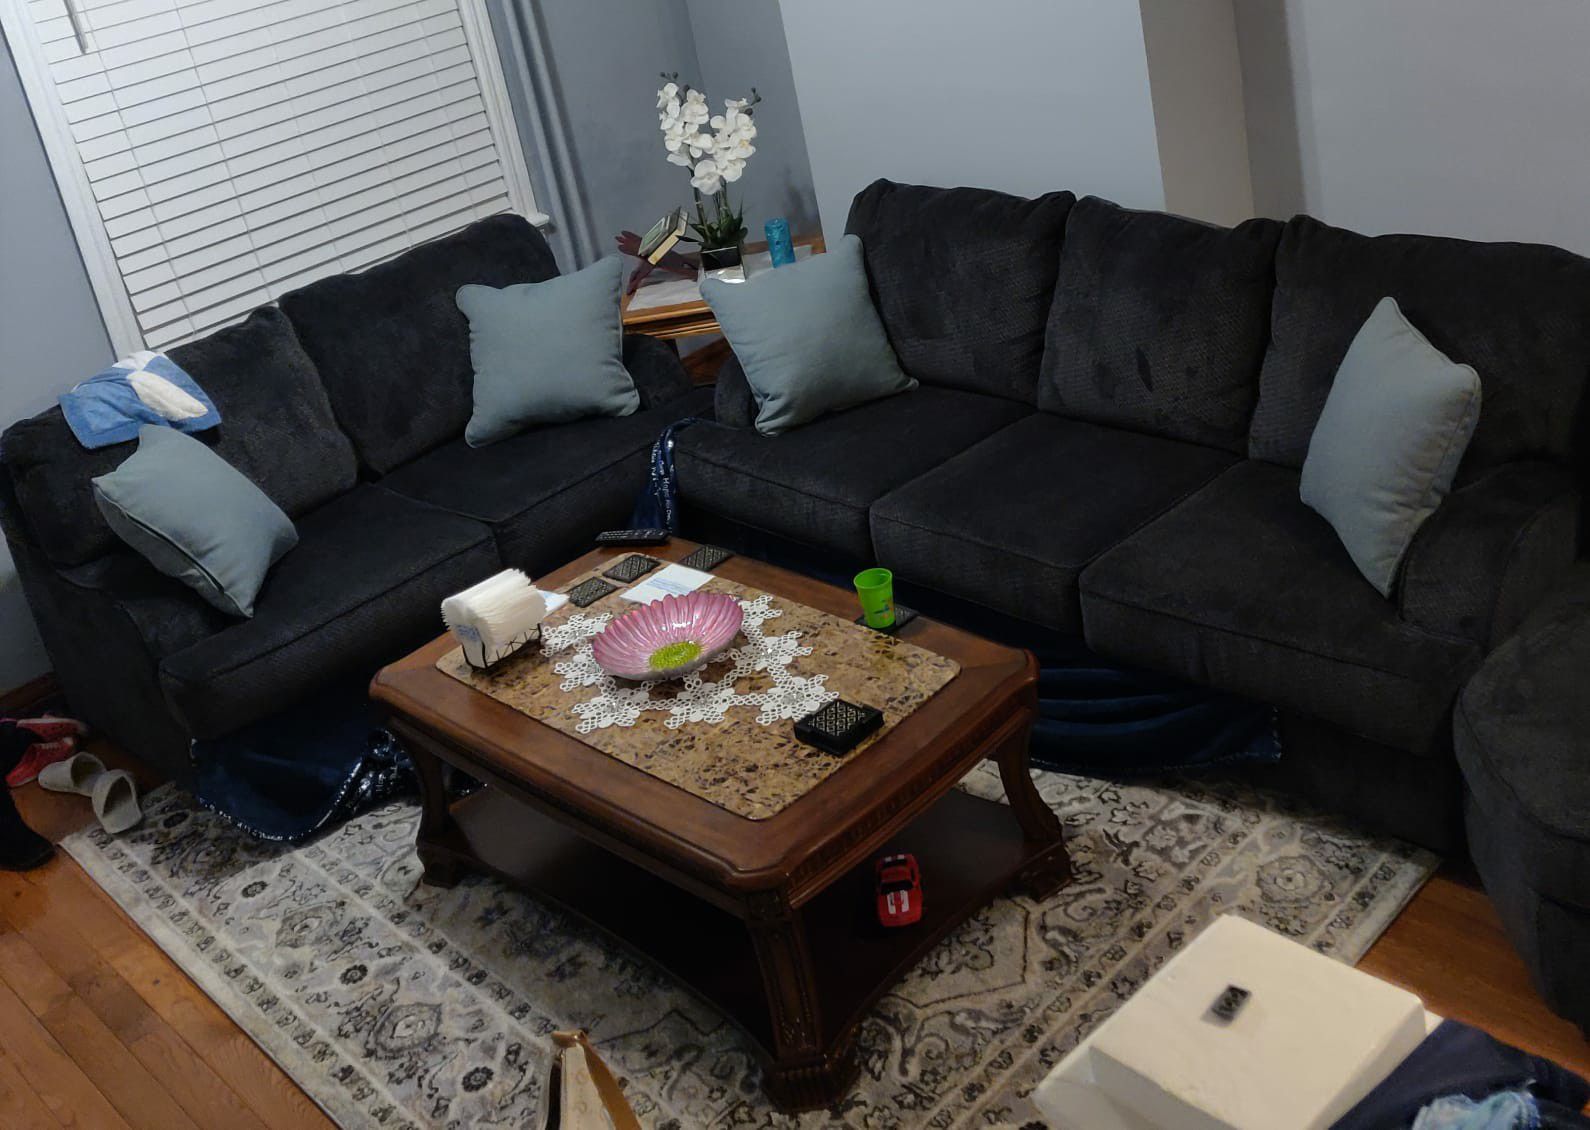 Ashley Furniture and coffee table in the middle has marble 1 year old